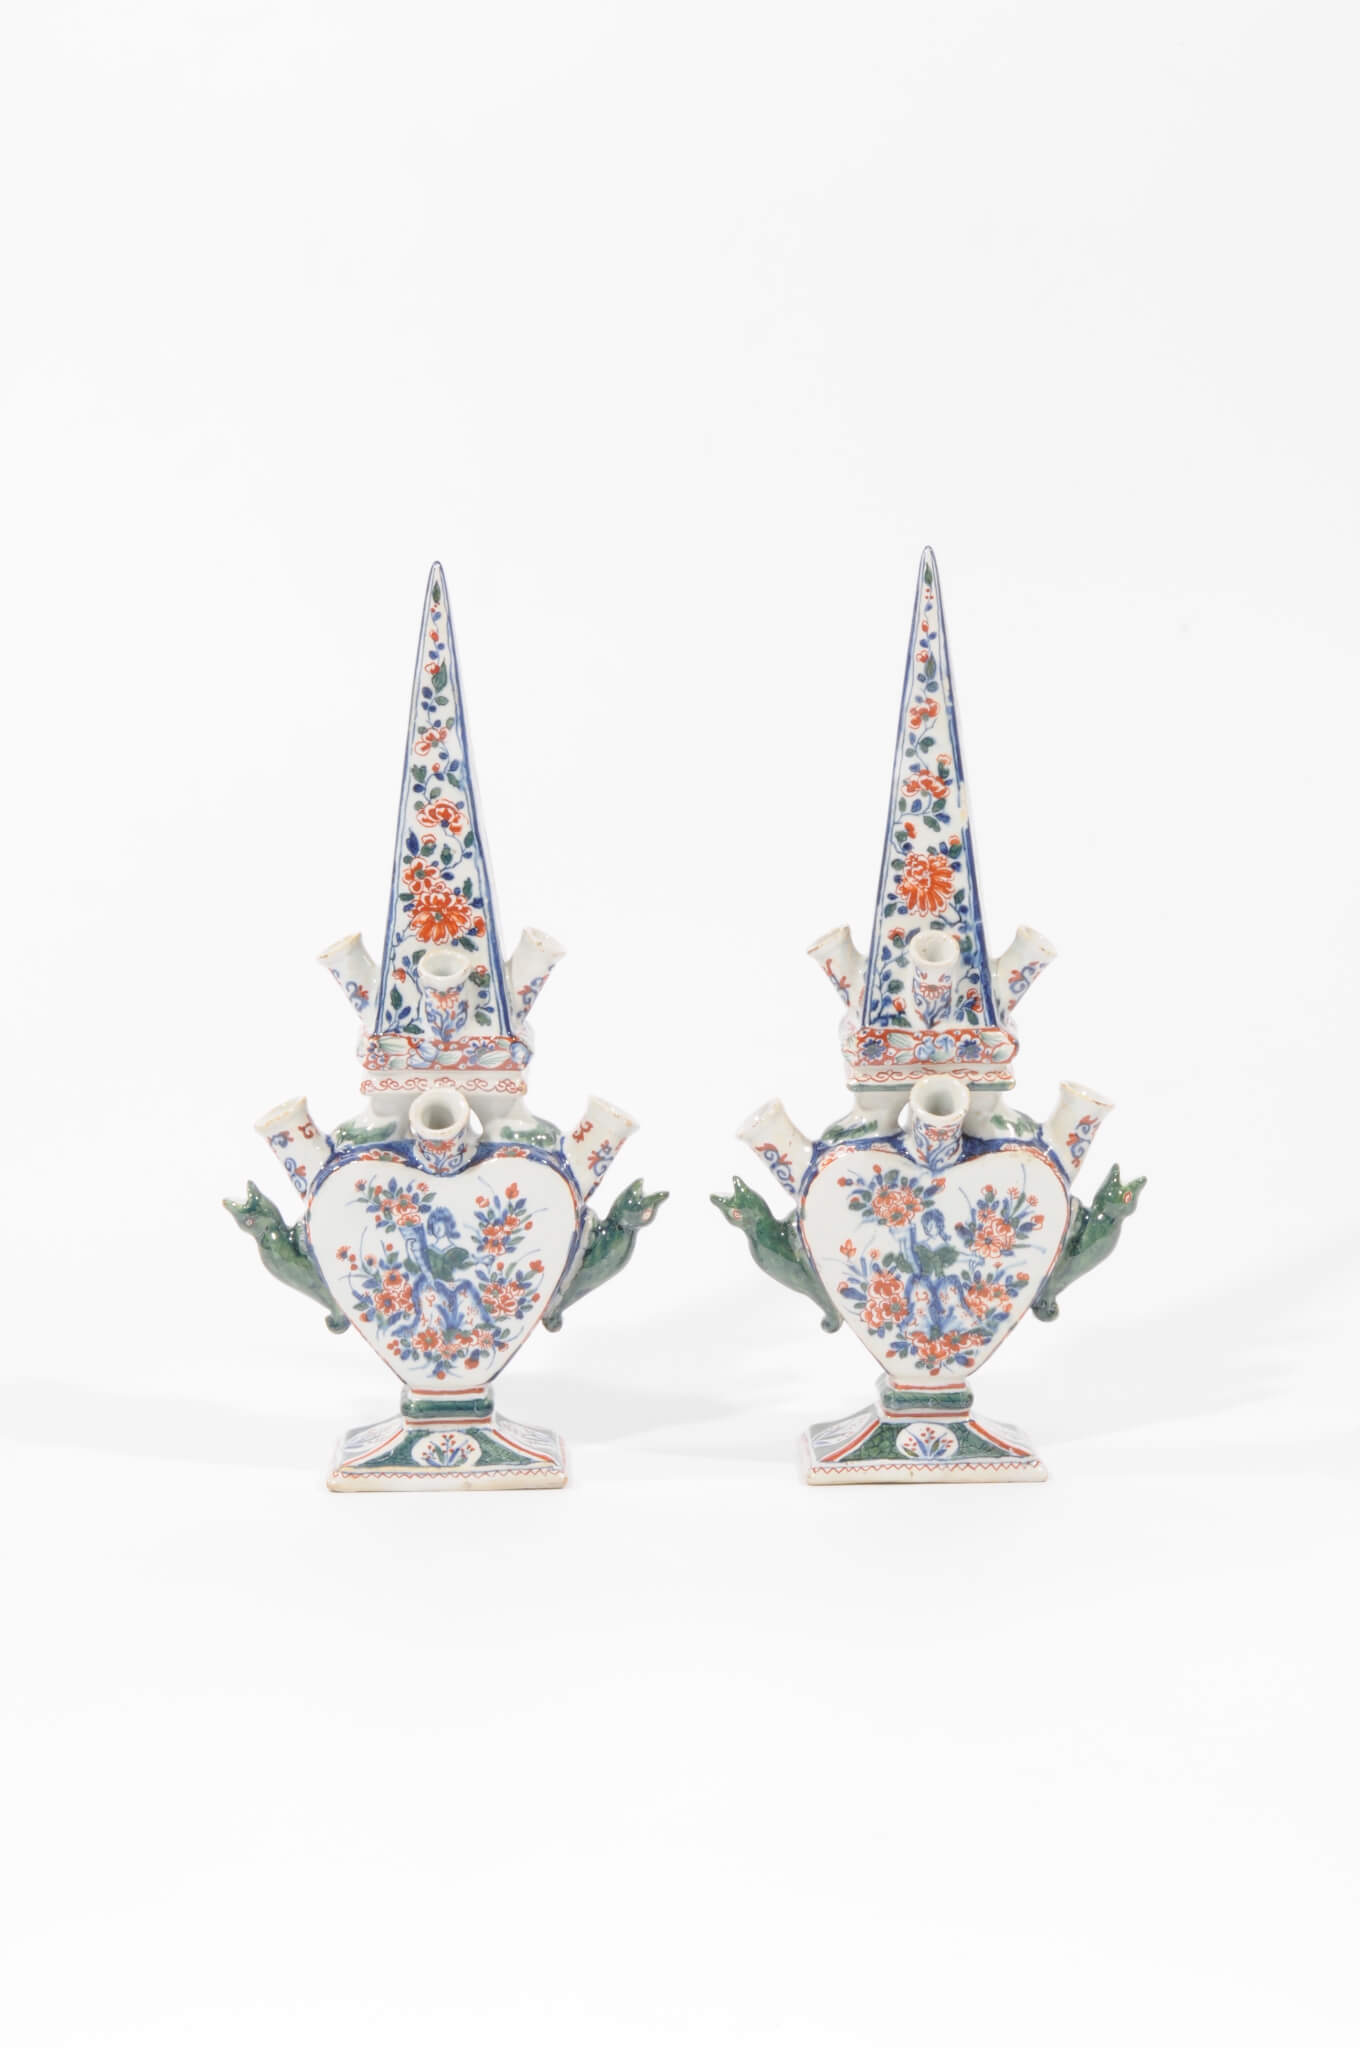 Delftware small flower vases